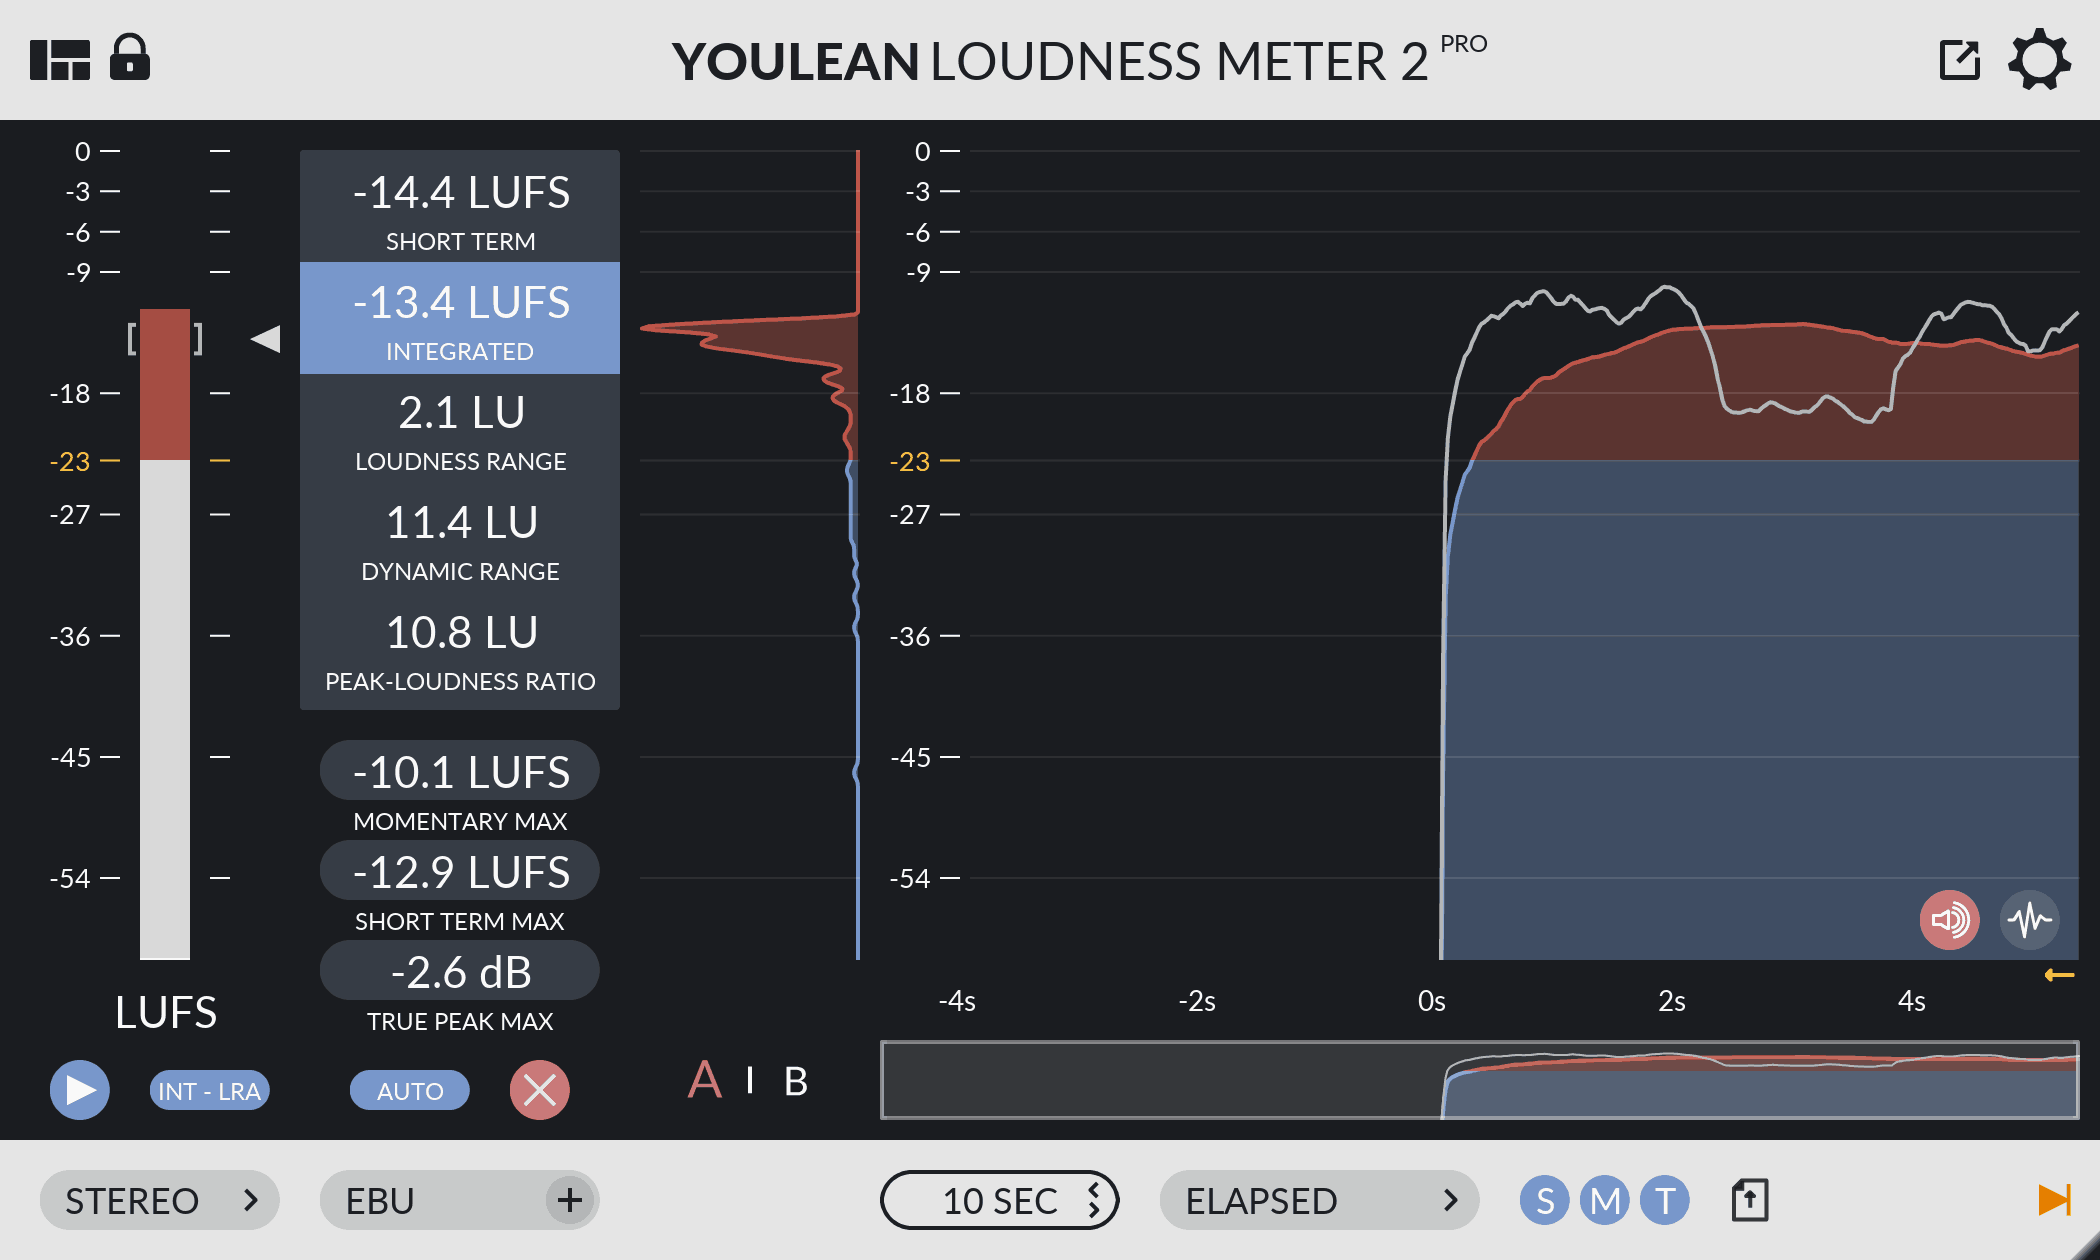 Youlean Loudness Meter Lite (iOS) - Overview  Introducing Youlean Loudness  Meter LITE for iOS! 🔔🔔🔔 Since I started producing on a desktop computer,  I wanted to have a meter always available